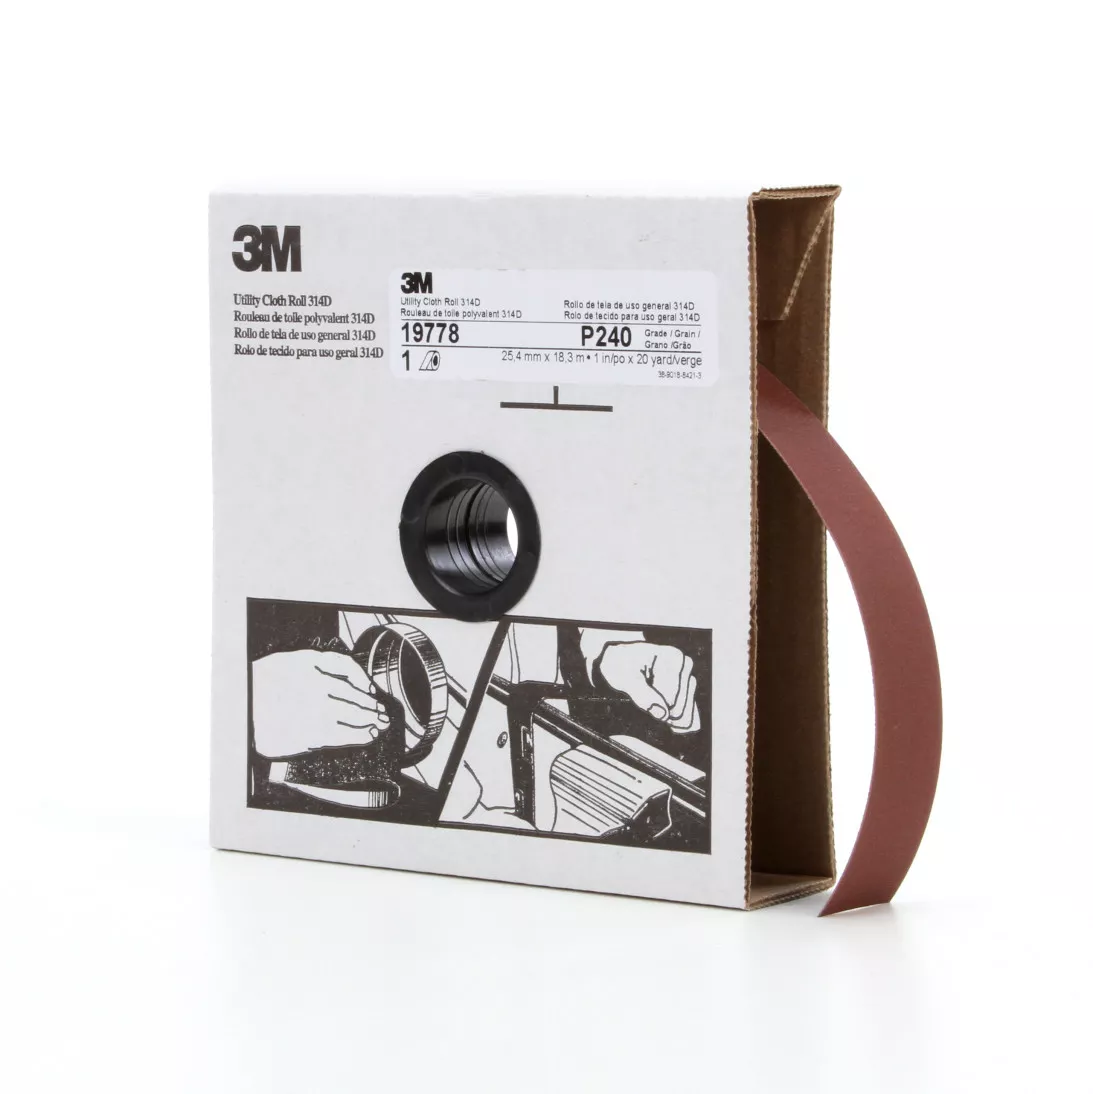 3M™ Utility Cloth Roll 314D, P240 J-weight, 1 in x 20 yd, 5 ea/Case